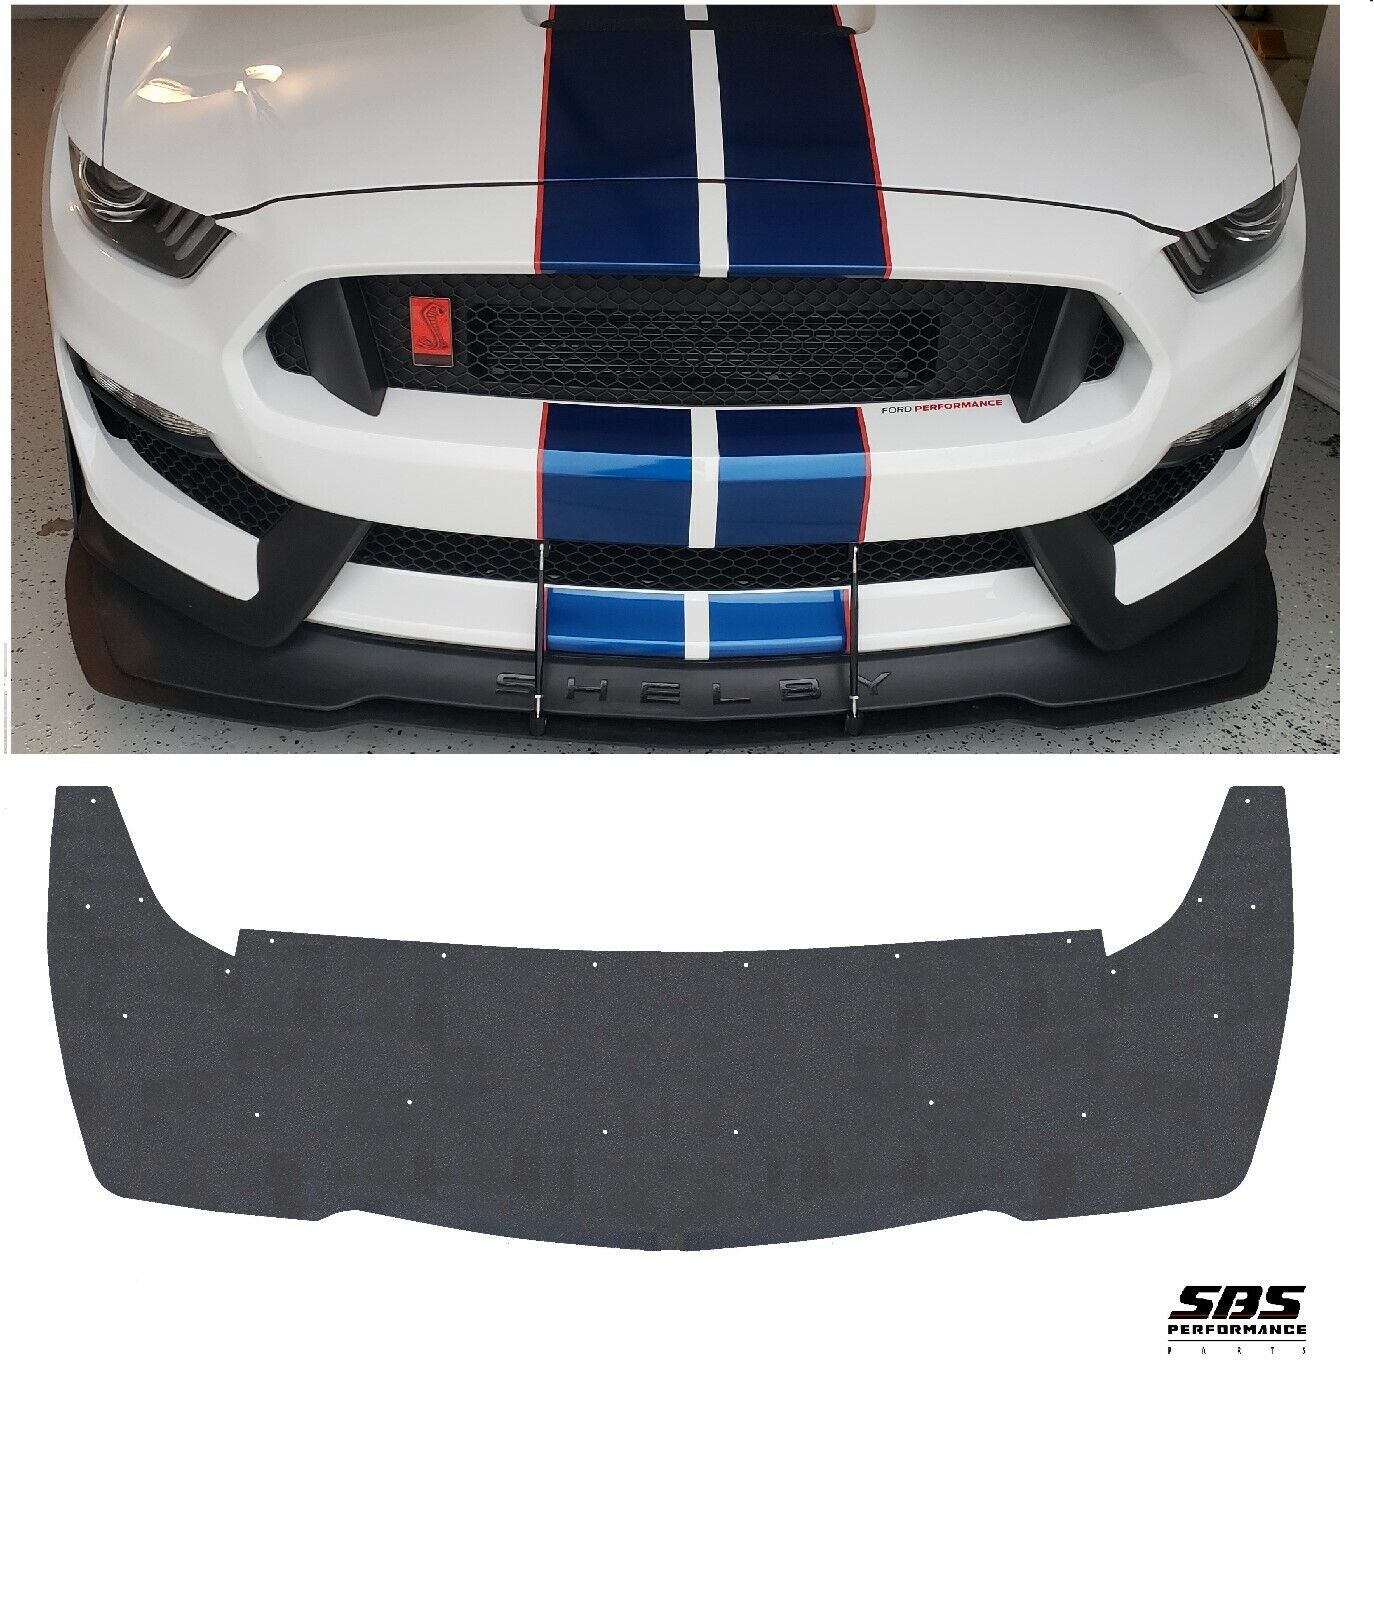 GT350R style undermount FRONT SPLITTER for 2015-2020 MUSTANG SHELBY GT350s 